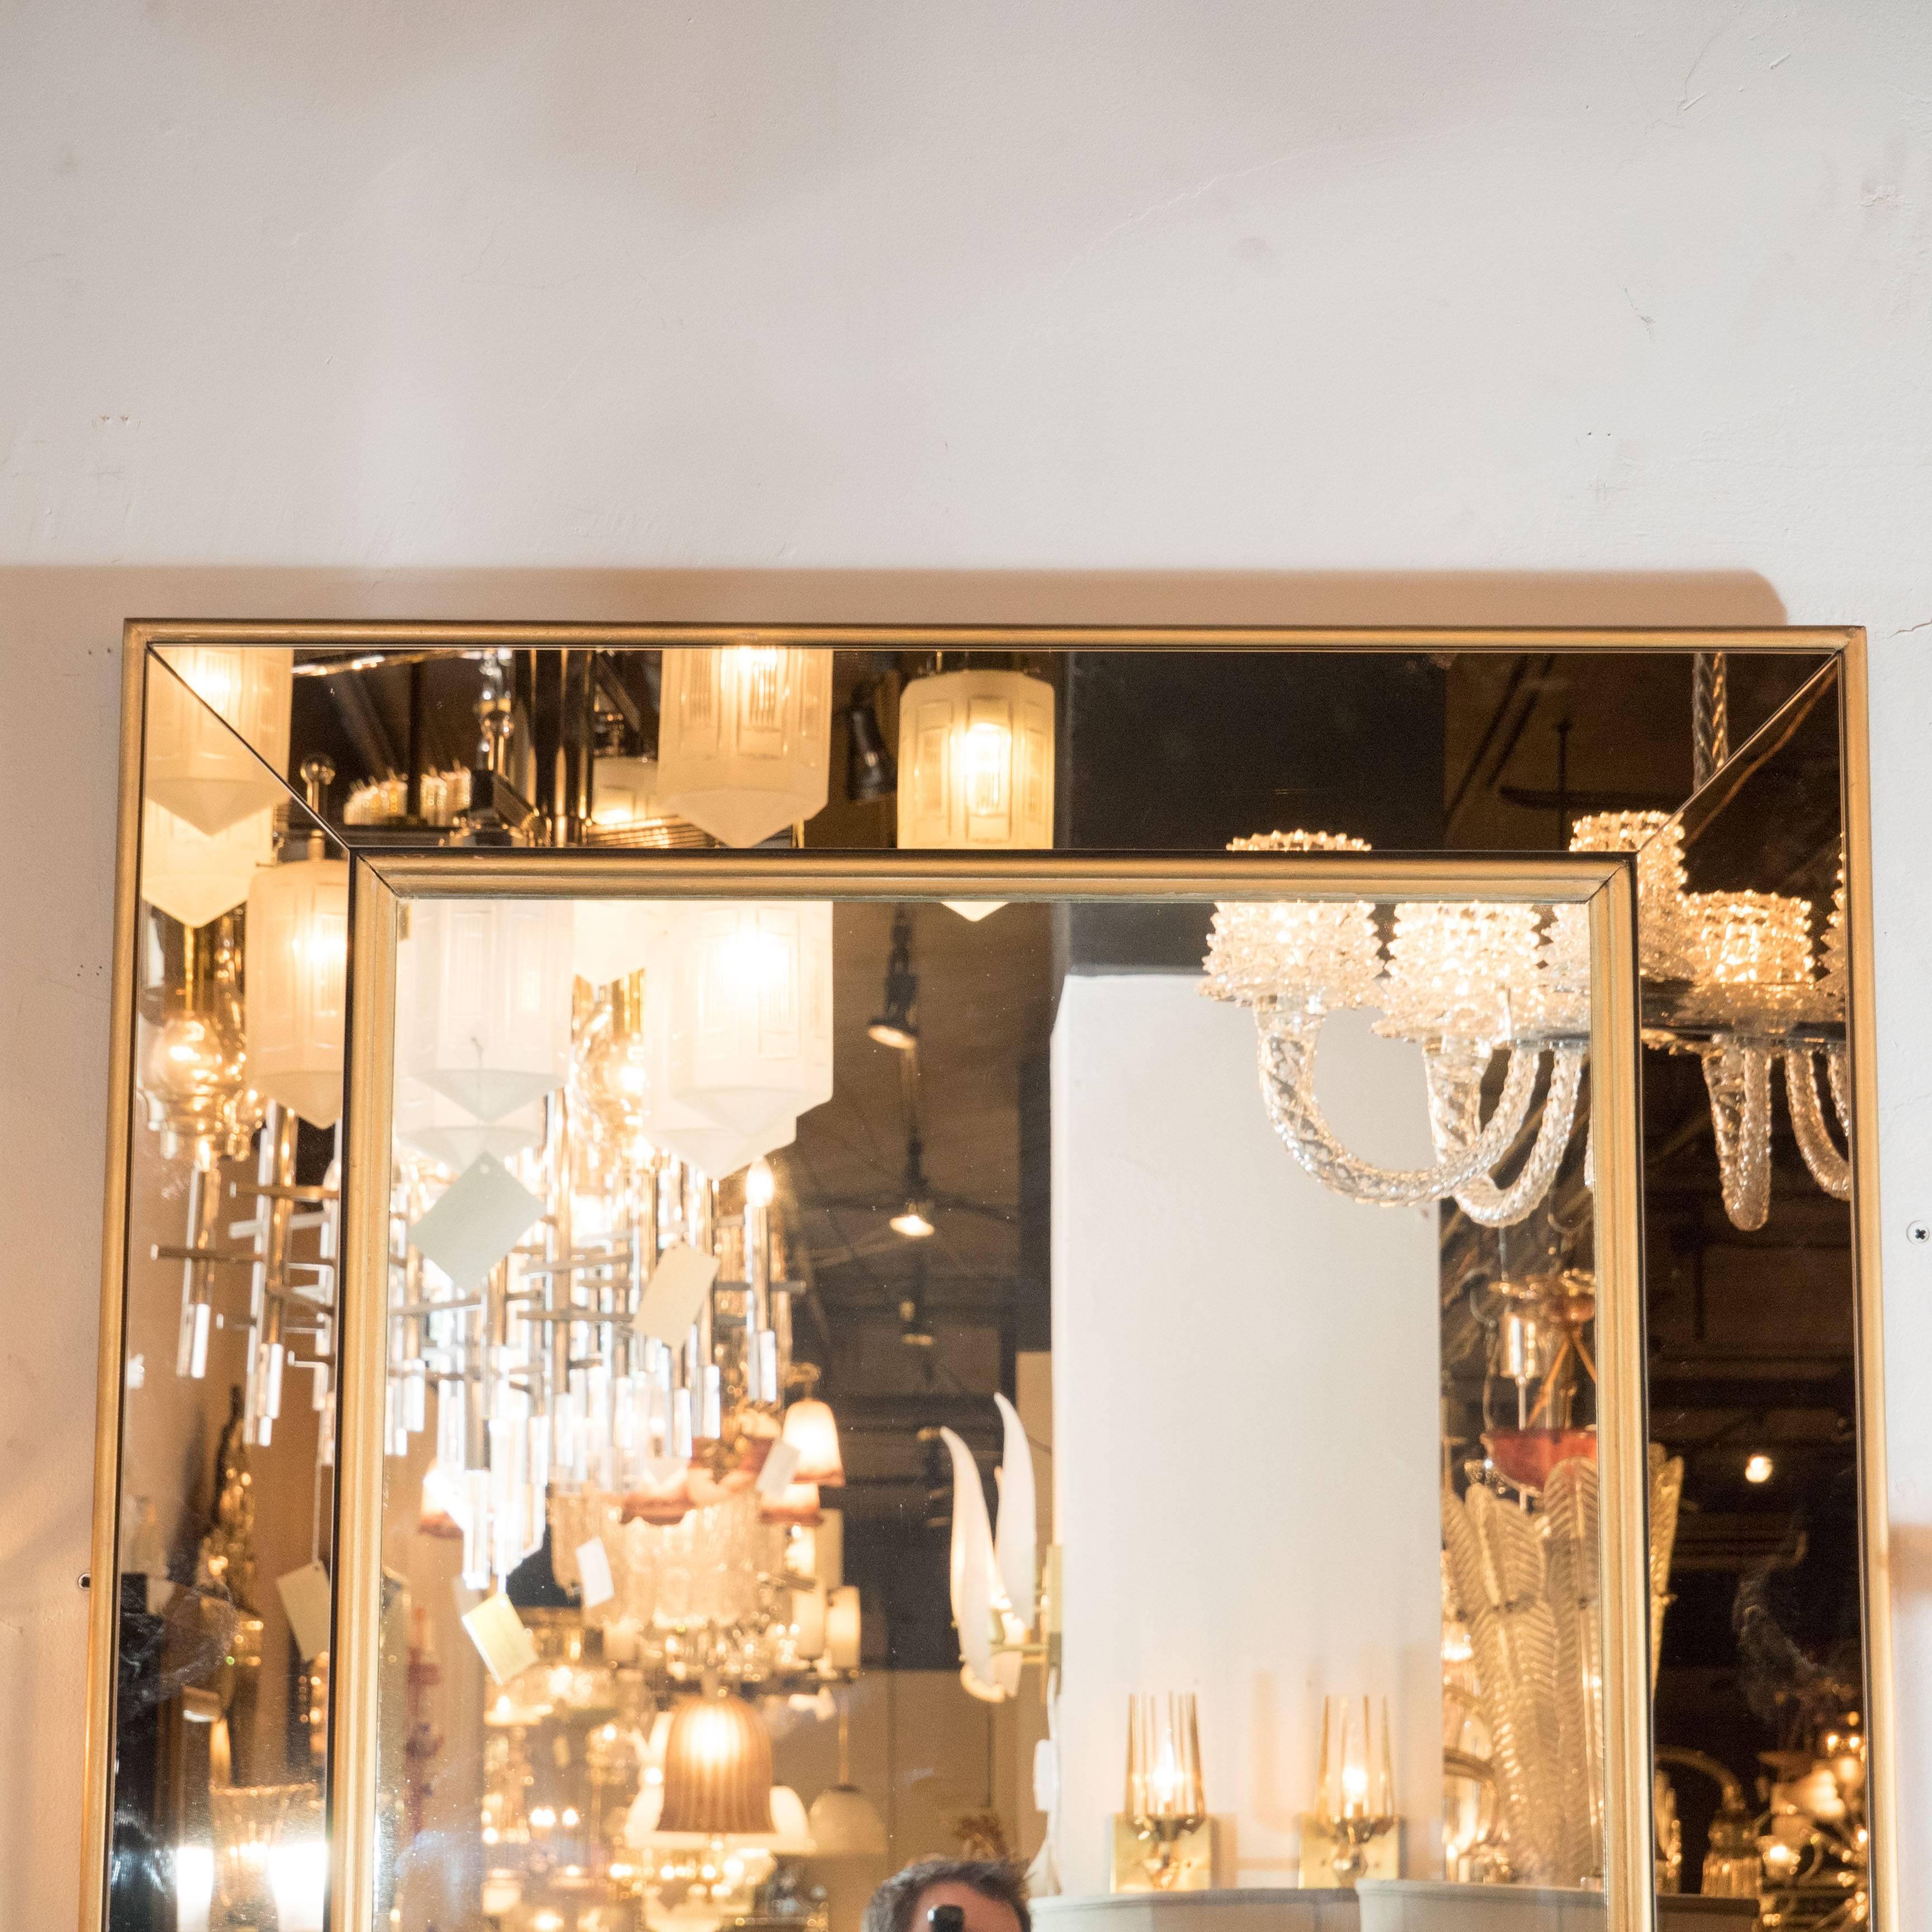 A stunning Mid-Century Modern giltwood and bronze mirrored glass mirror, the rectangular shaped stylish mirror with inset four panels of bronze mirror and giltwood frame. A modern yet classical elegant design fits any style of interior, perfect for